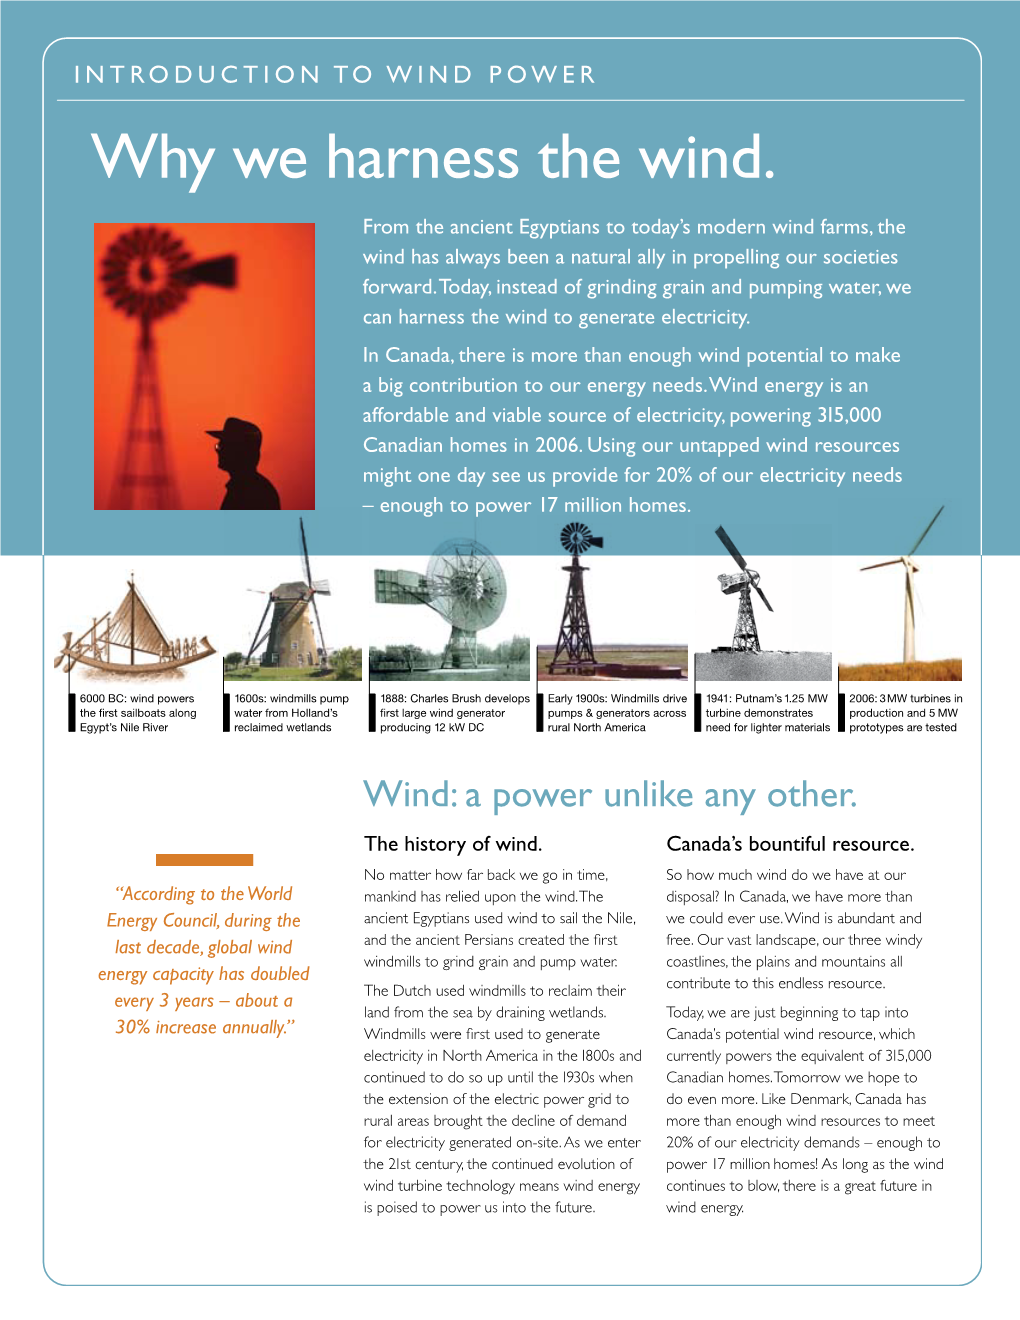 Why We Harness the Wind